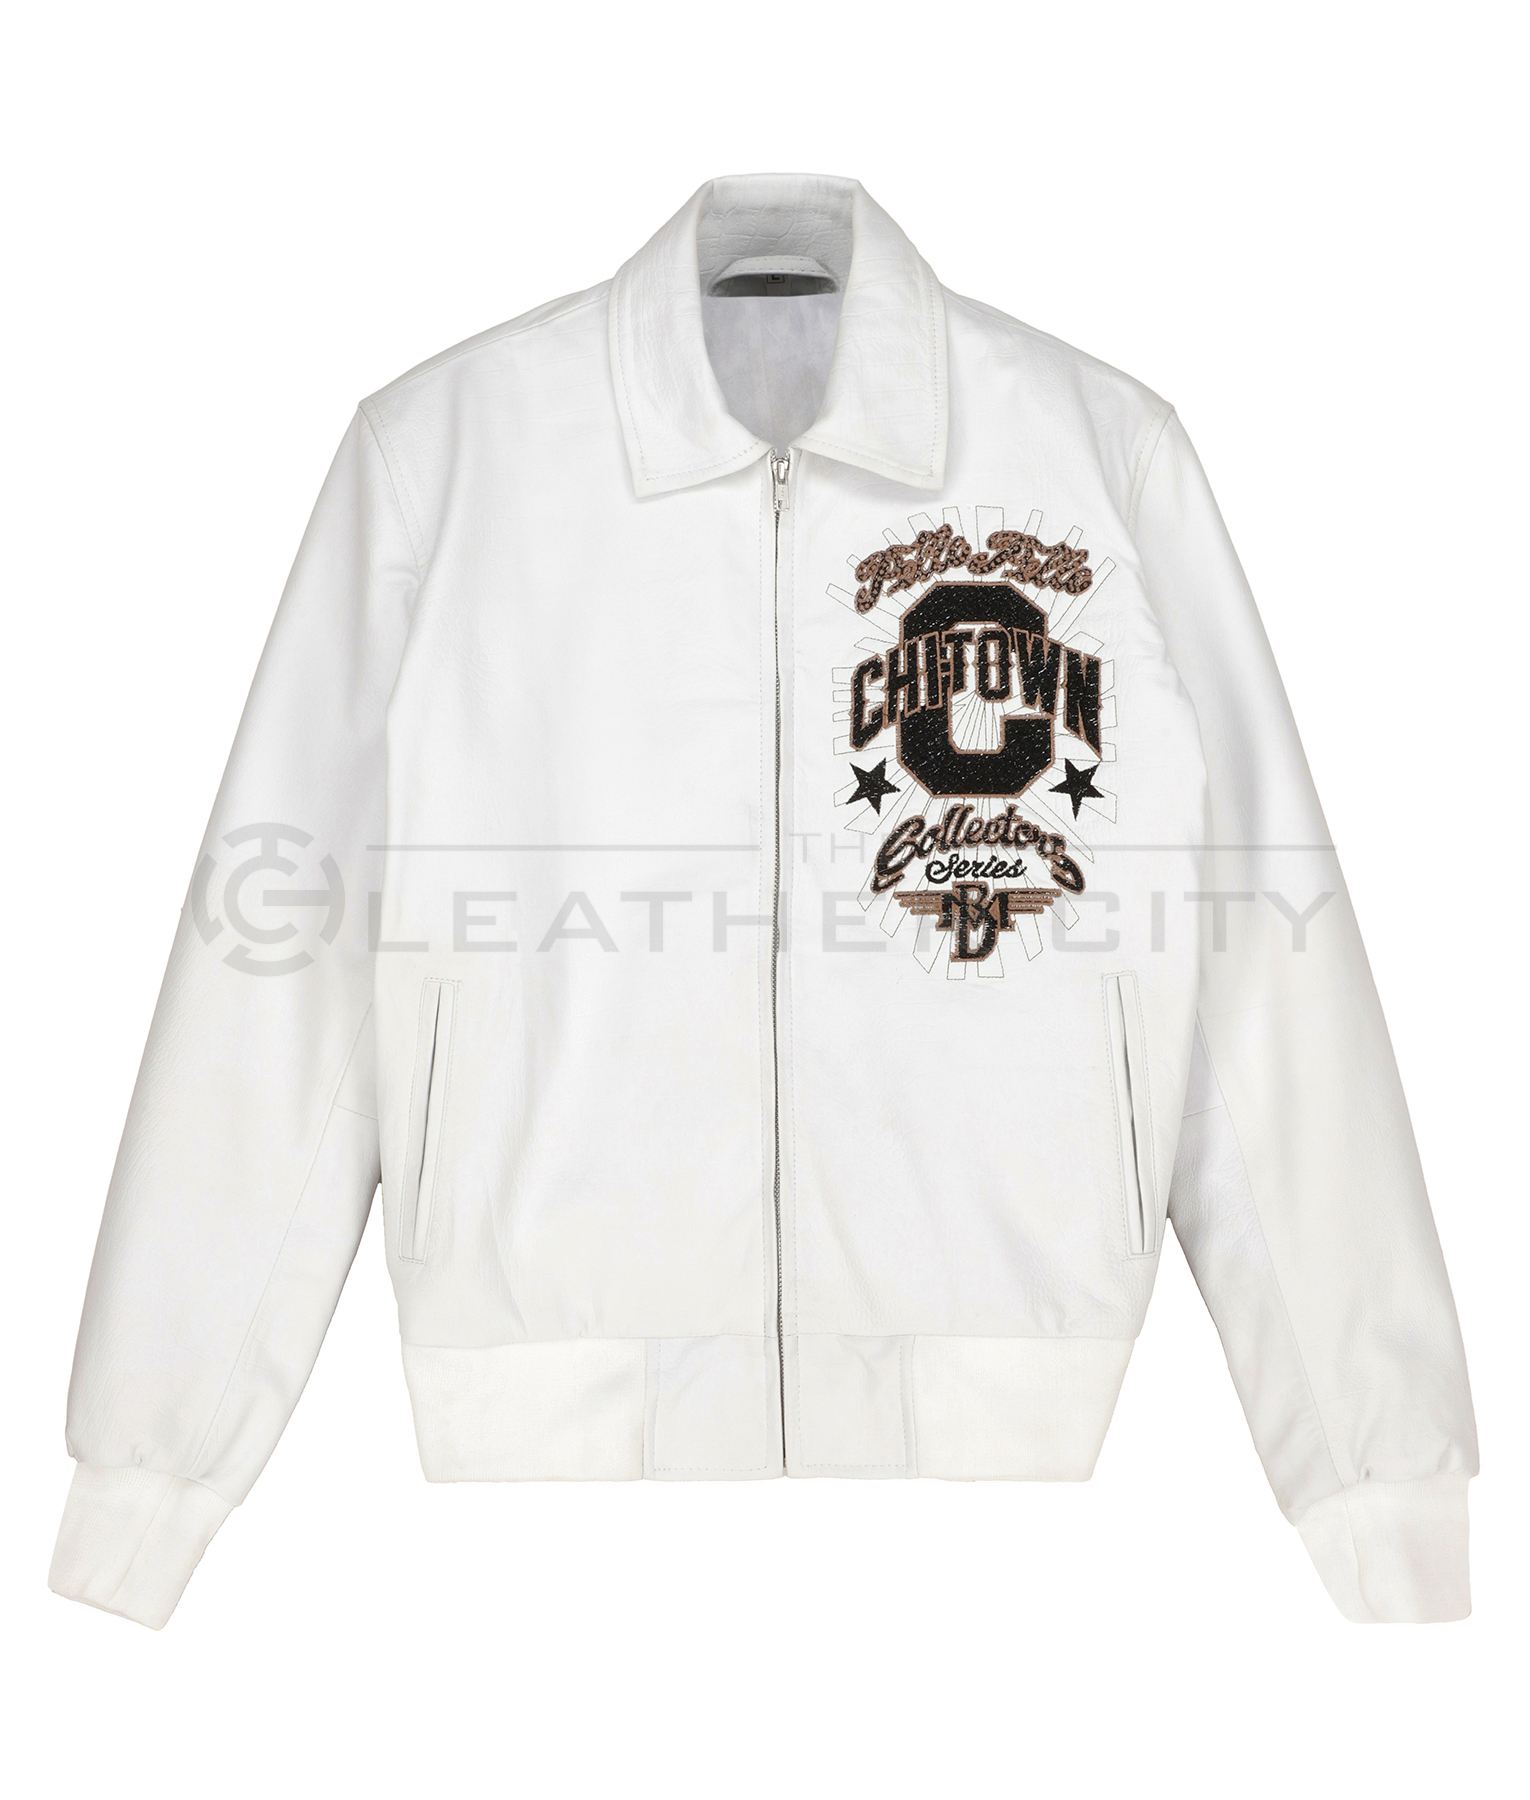 White Pelle Pelle Leather Jacket | The Leather City